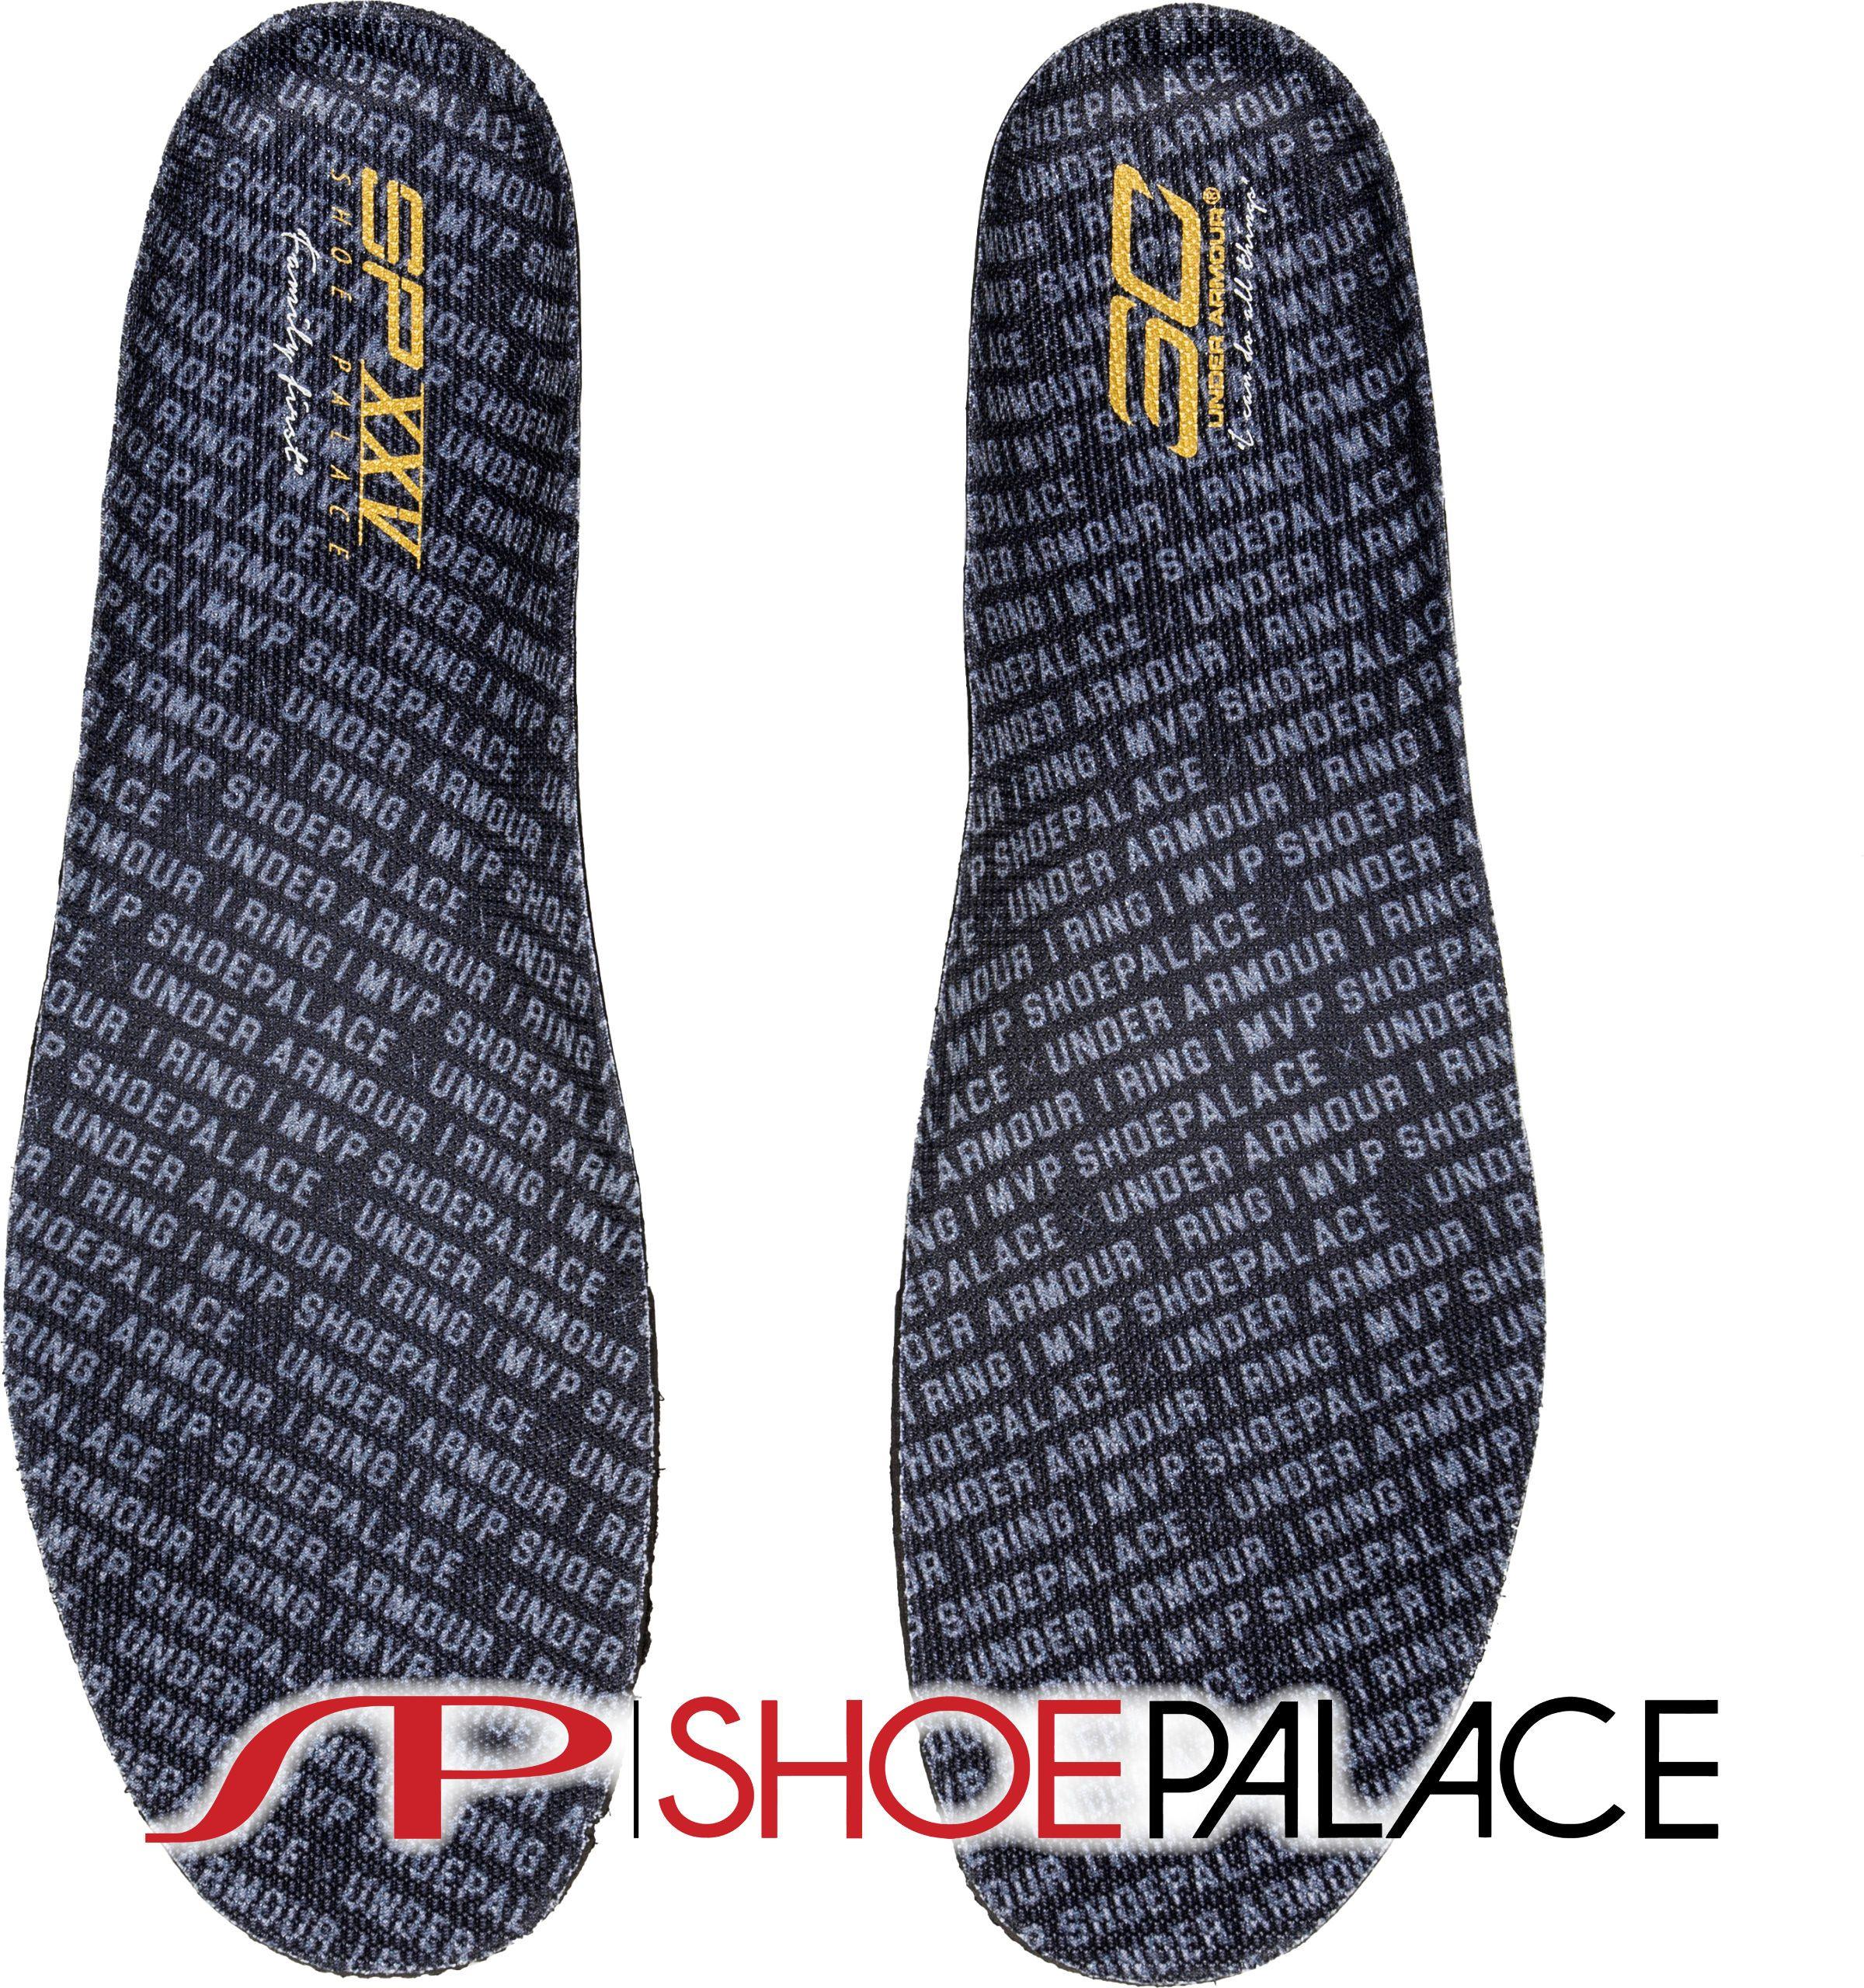 Shoe Palace Logo - Under Armour 3022392 001 Shoe Palace X Under Armour Curry 1 25th